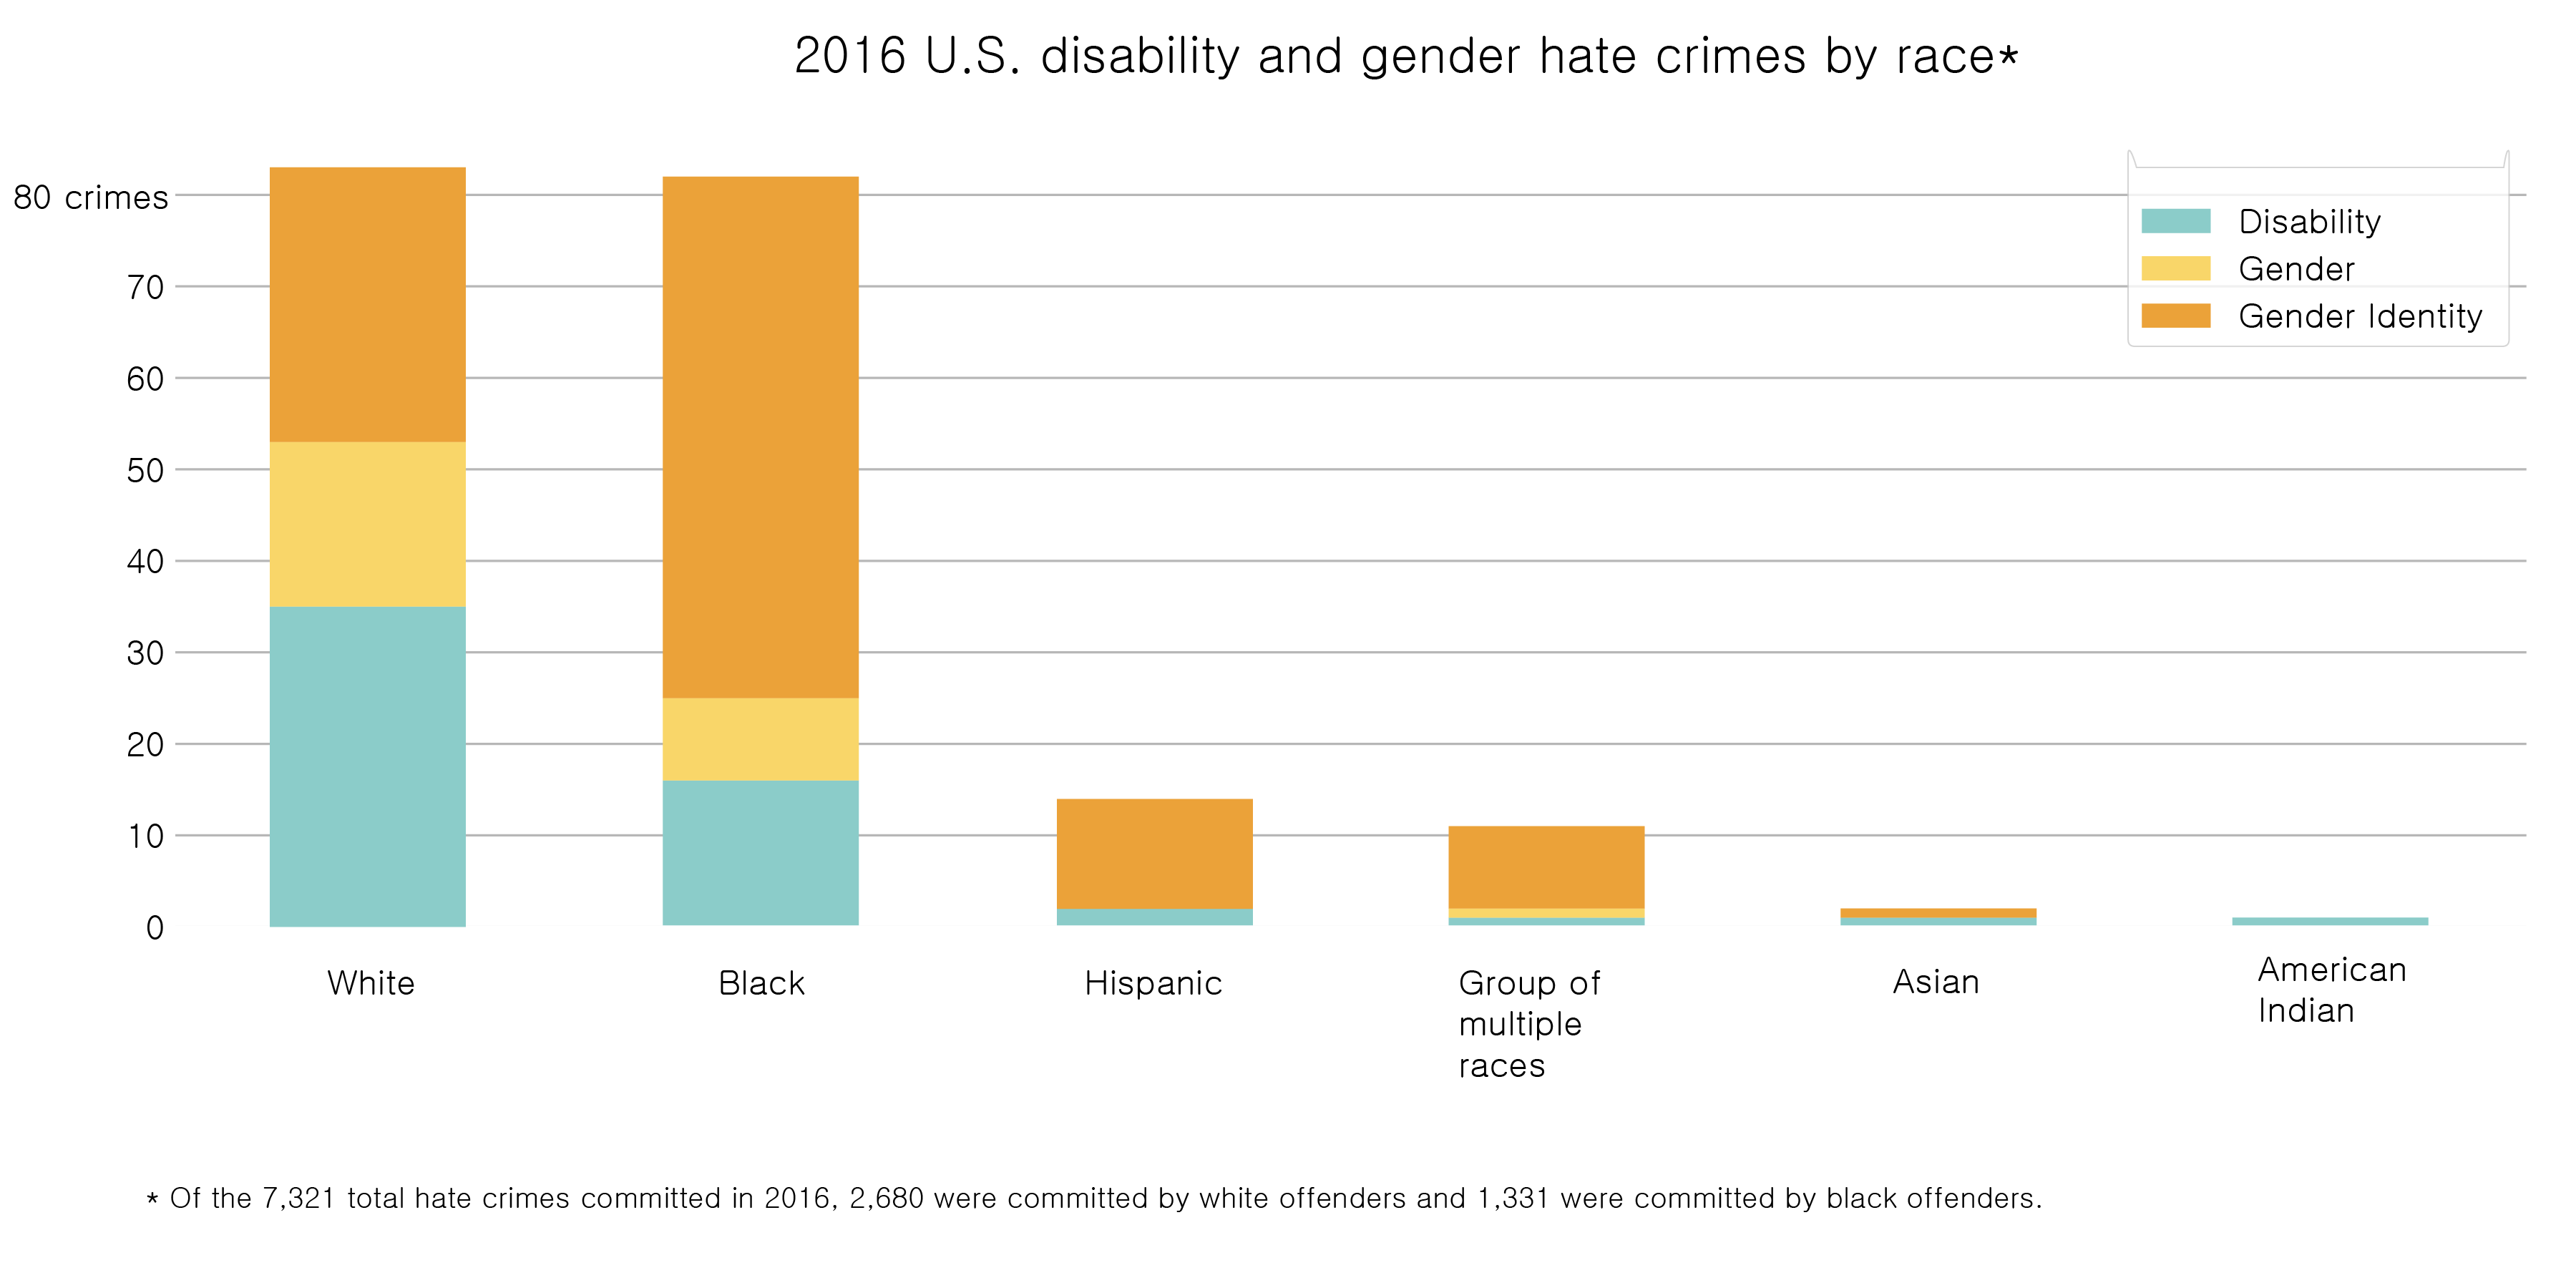 Graph of hate crimes motivated by disability, gender, or gender identity, by race of offender